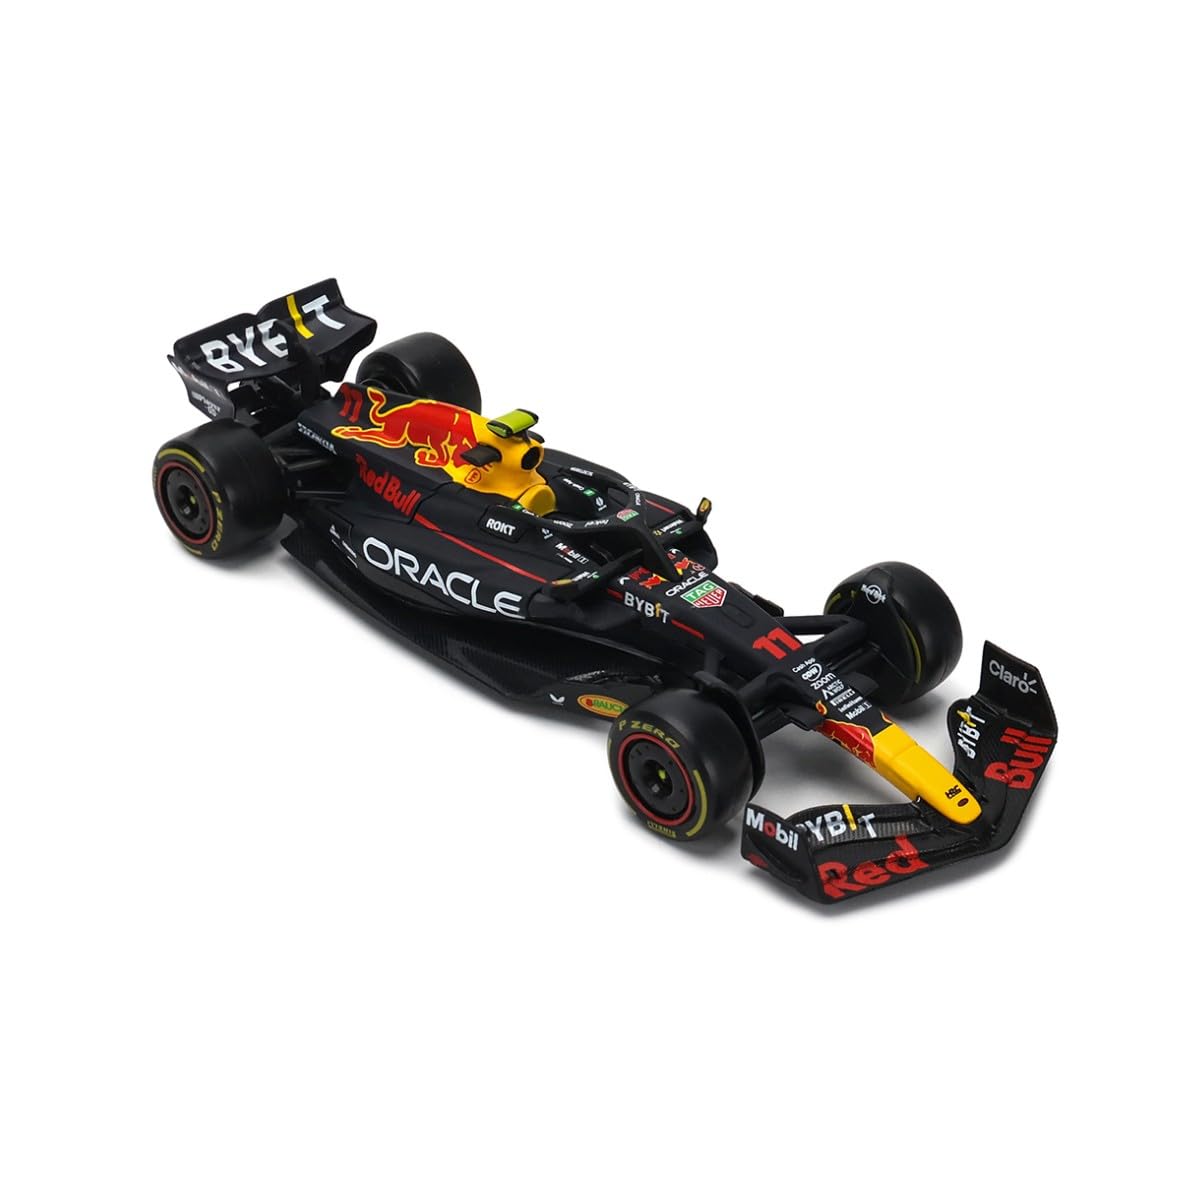 HTLNUZD Bburago 1:43 2023 New F1RB19#11 F1Champion Racing Formula Alloy Car Perez 1/43 RB19 No.11 for Red Bull Team for Red Bull Die cast Model Car Collection Gift